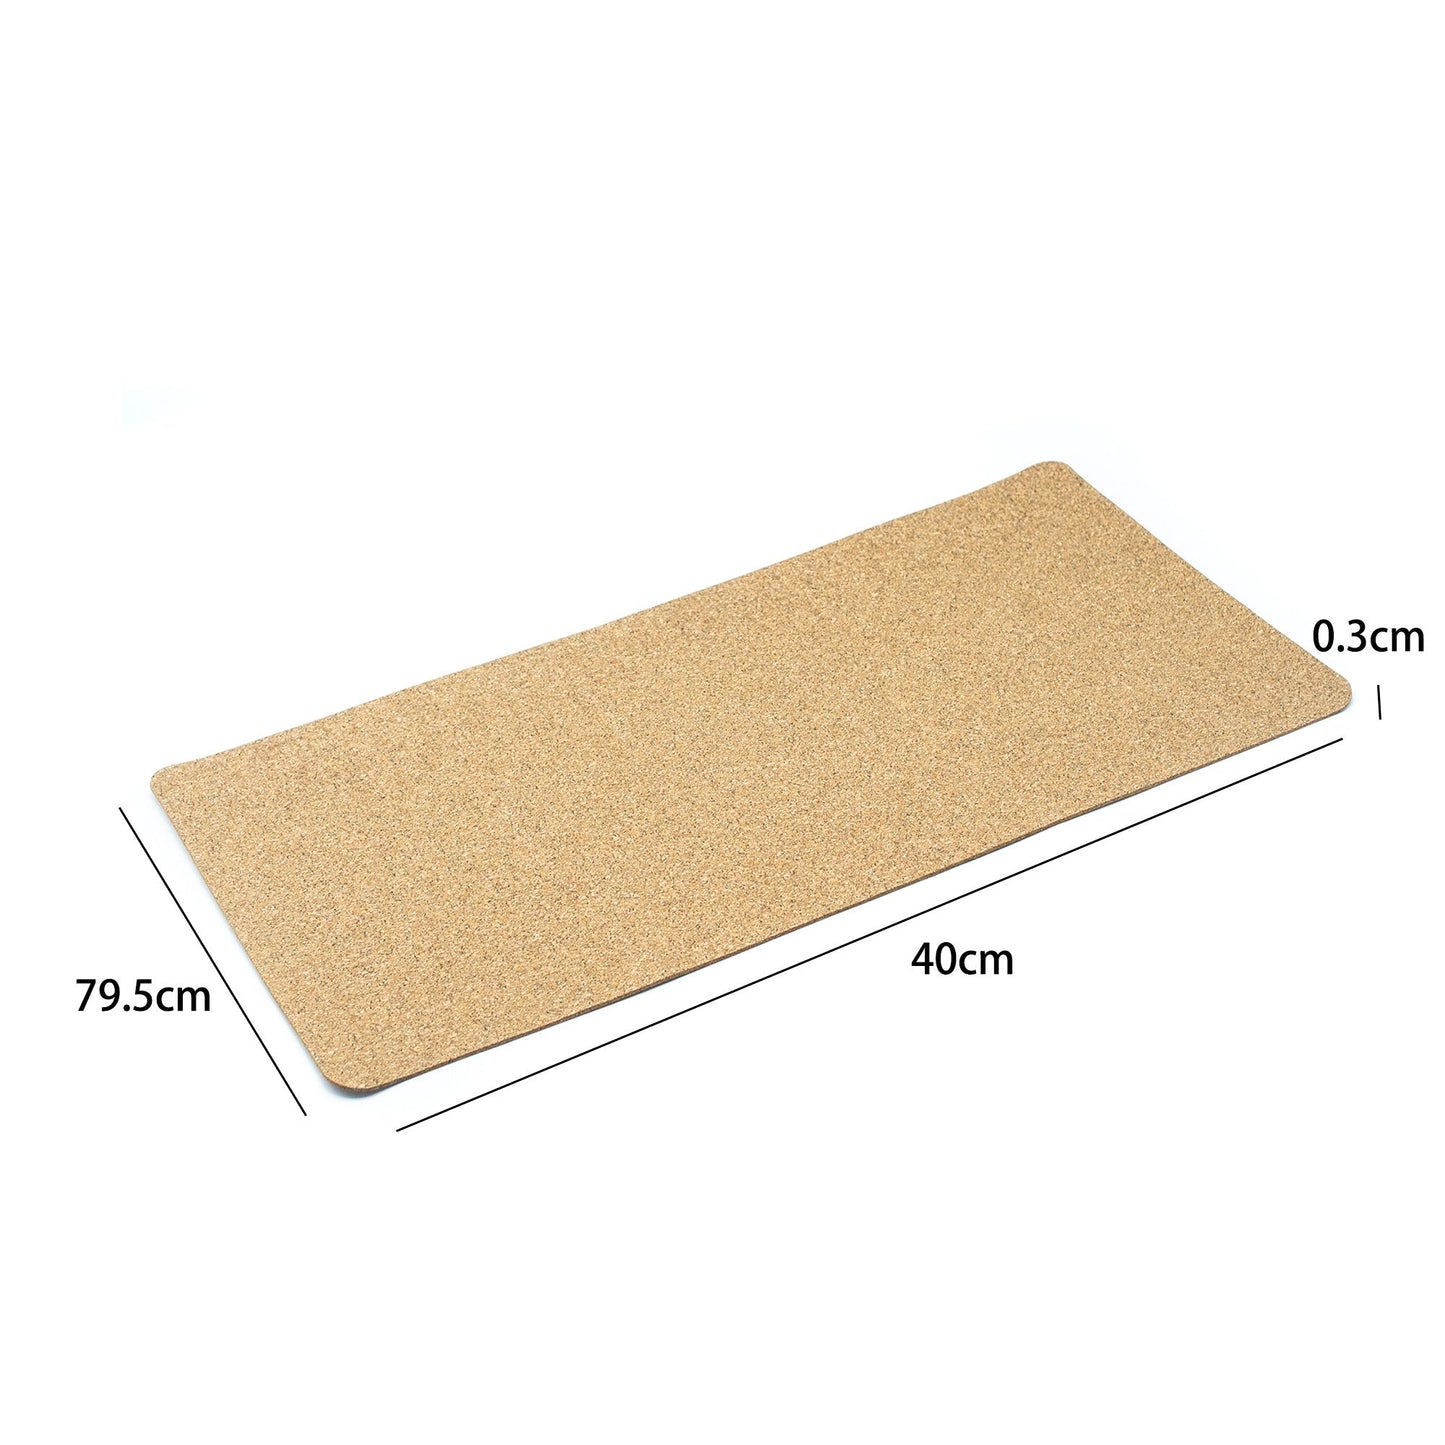 Water Repellent Desk Mouse Pad Cork Leather | THE CORK COLLECTION